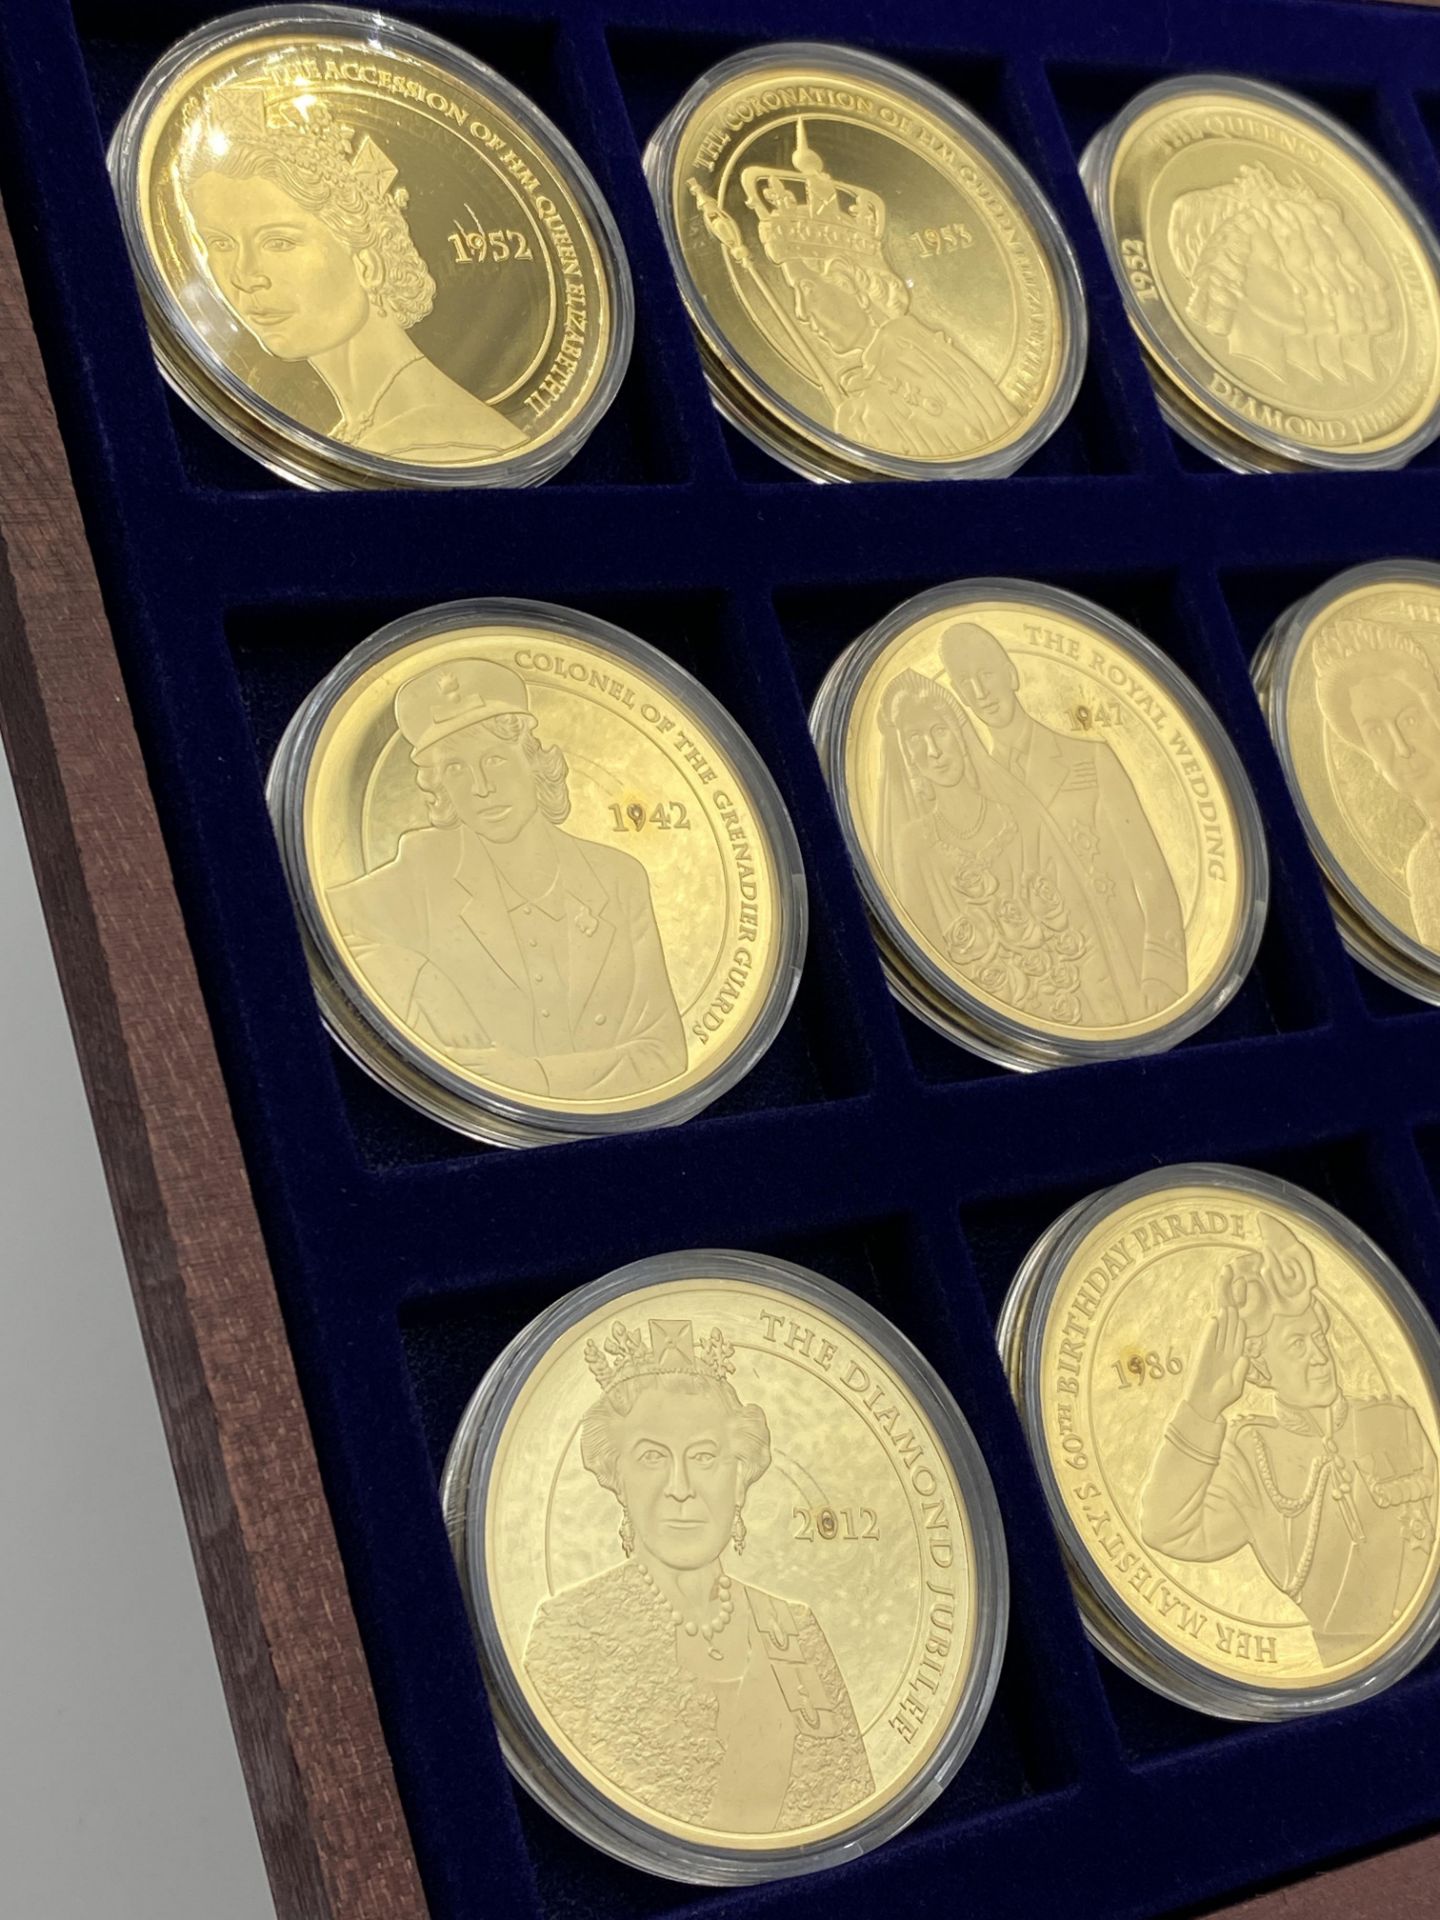 Twelve gold plated Portraits of the Queen Diamond Jubilee coins in presentation box - Image 6 of 6